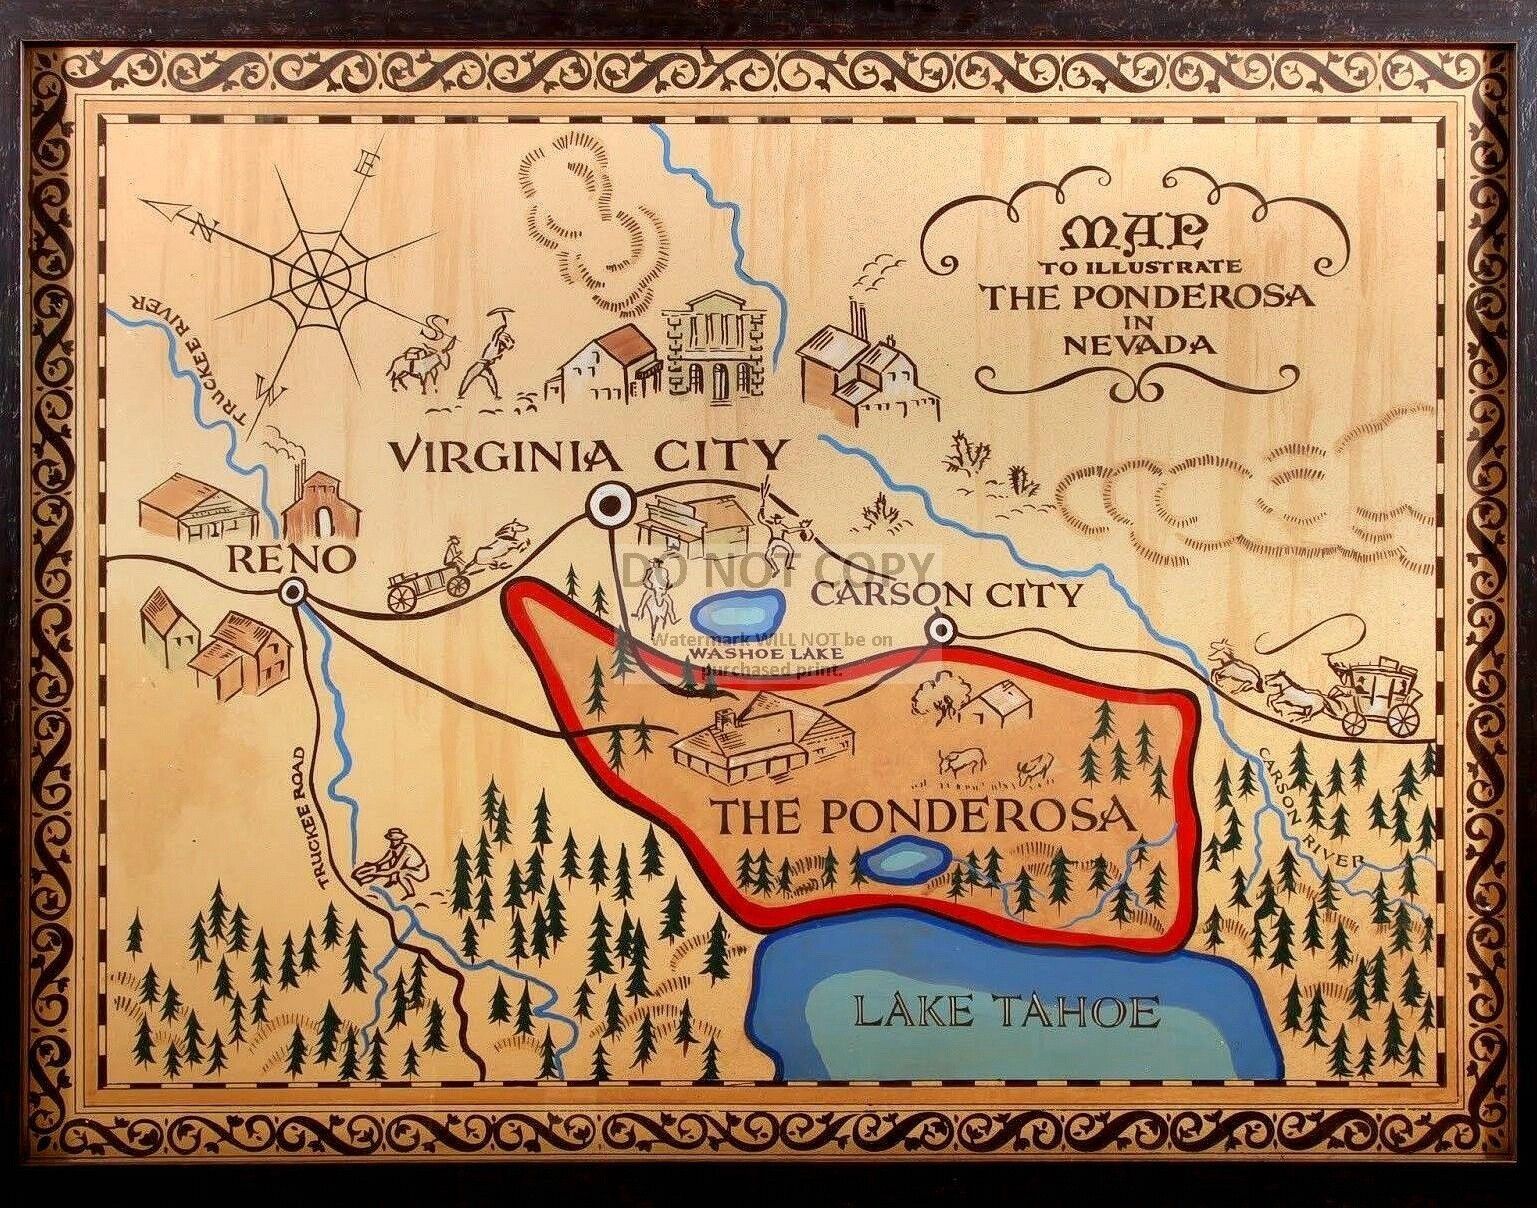 MAP OF THE PONDEROSA FROM THE TV SERIES 